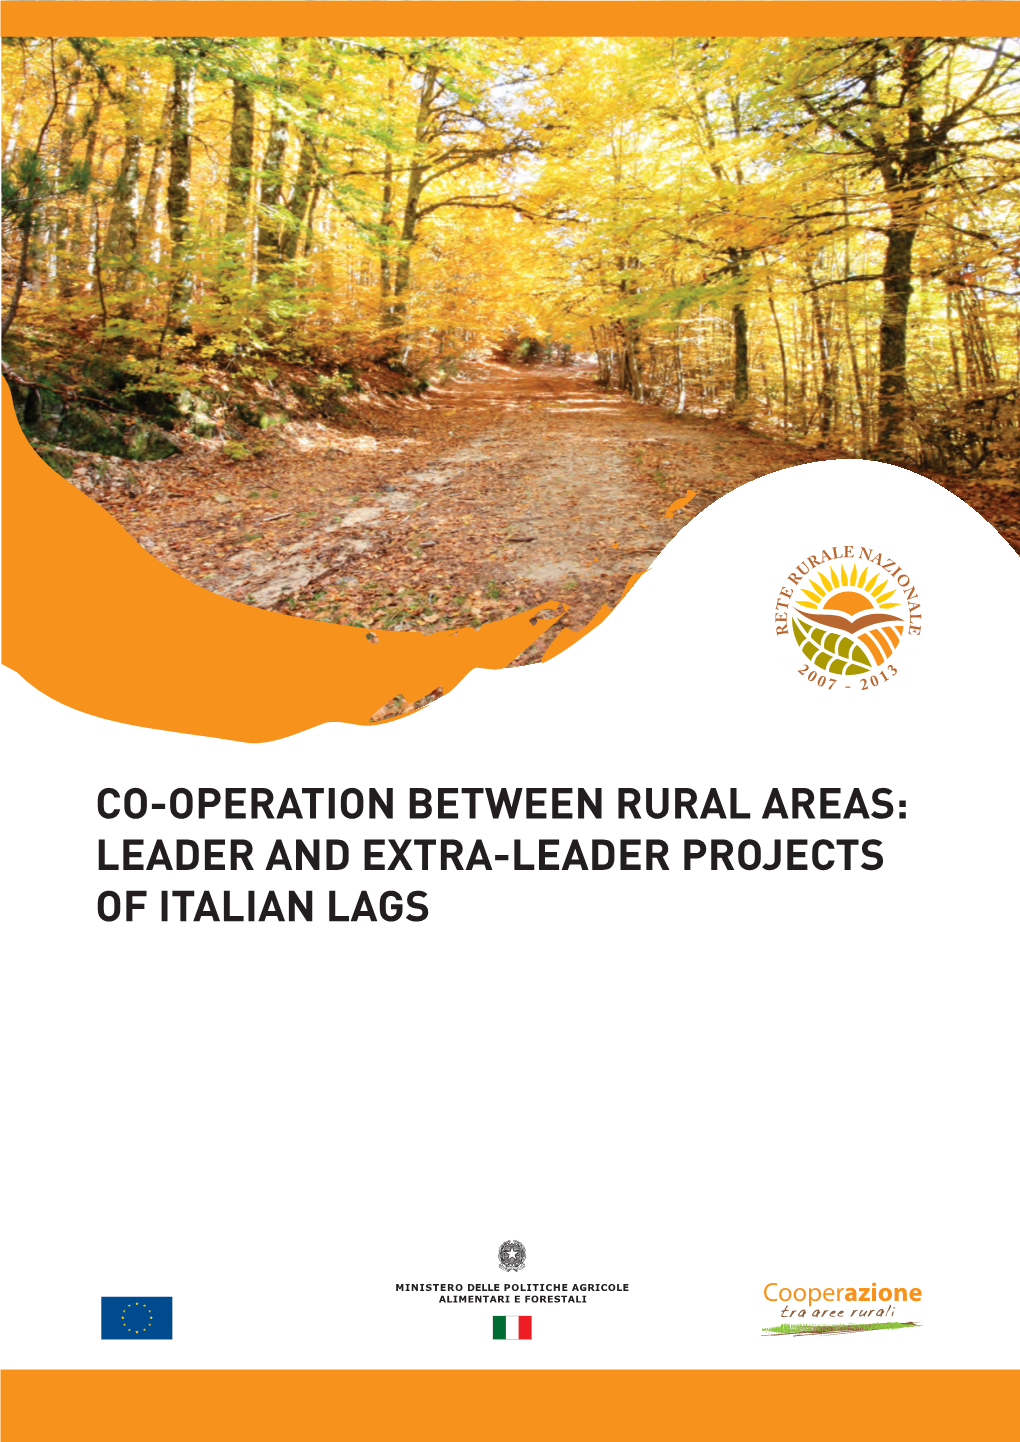 Co-Operation Between Rural Areas: Leader and Extra-Leader Projects of Italian Lags